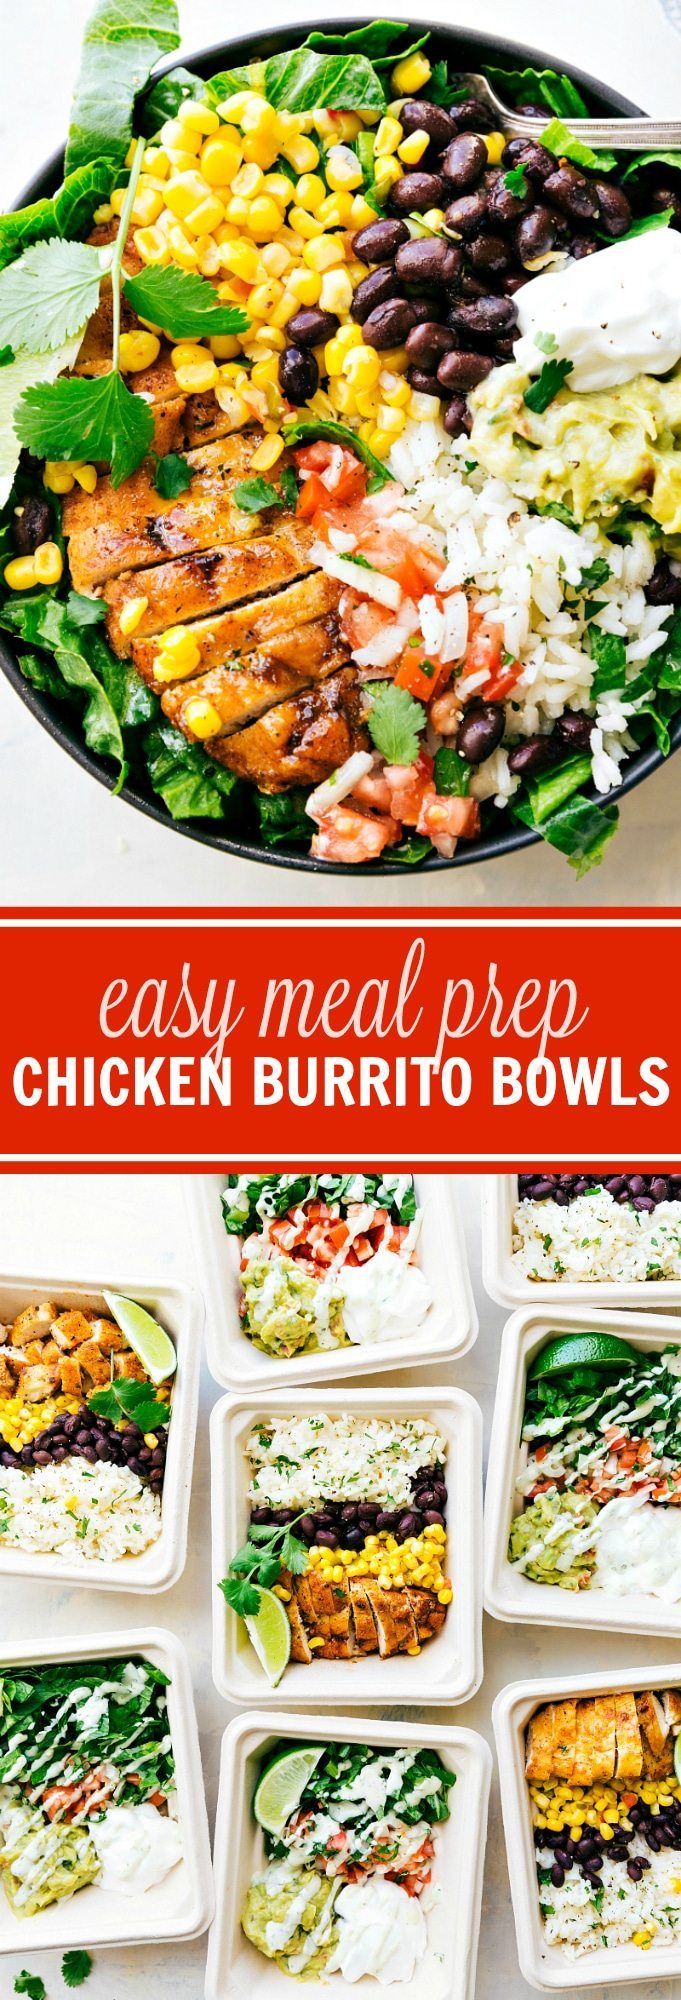 EASY MEAL PREP Chicken Burrito Bowls!! Tons of short-cuts for a better than a restaurant burrito bowl! via chelseasmessyapron.com